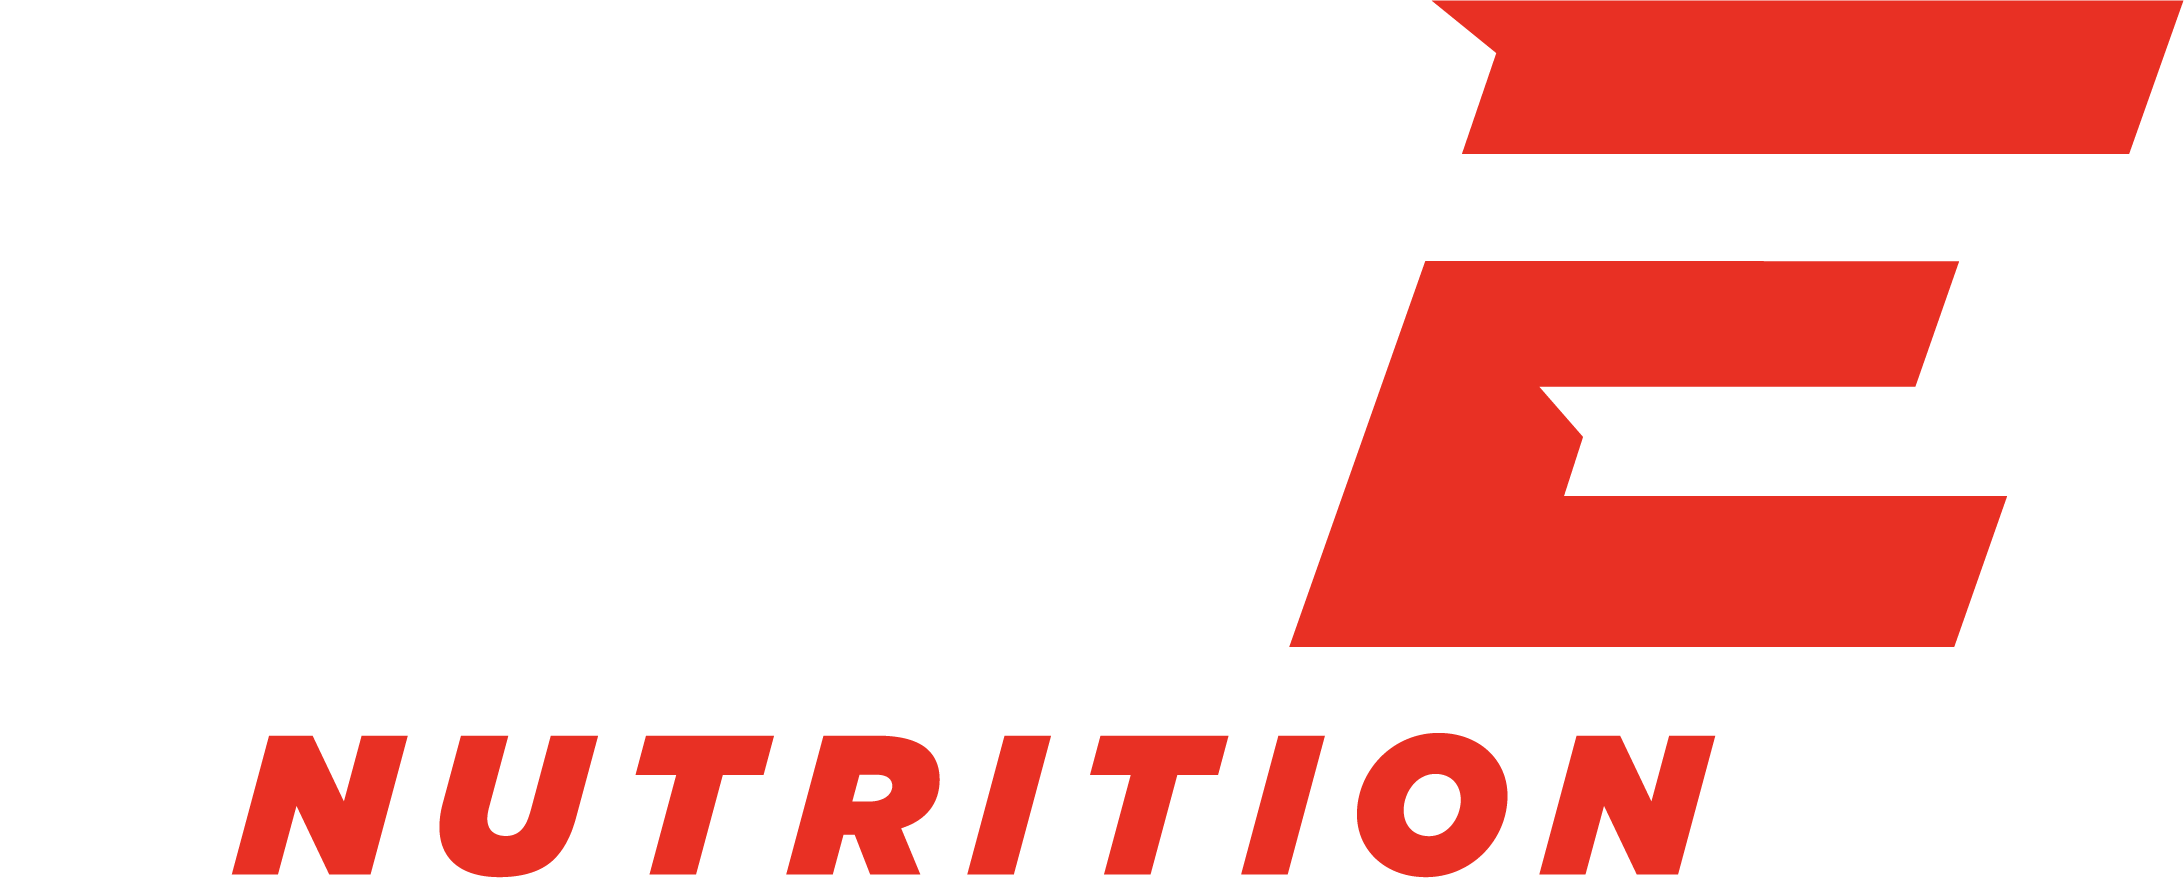 Shop Sports Nutrition Vitamins and Supplements at Big E Nutrition